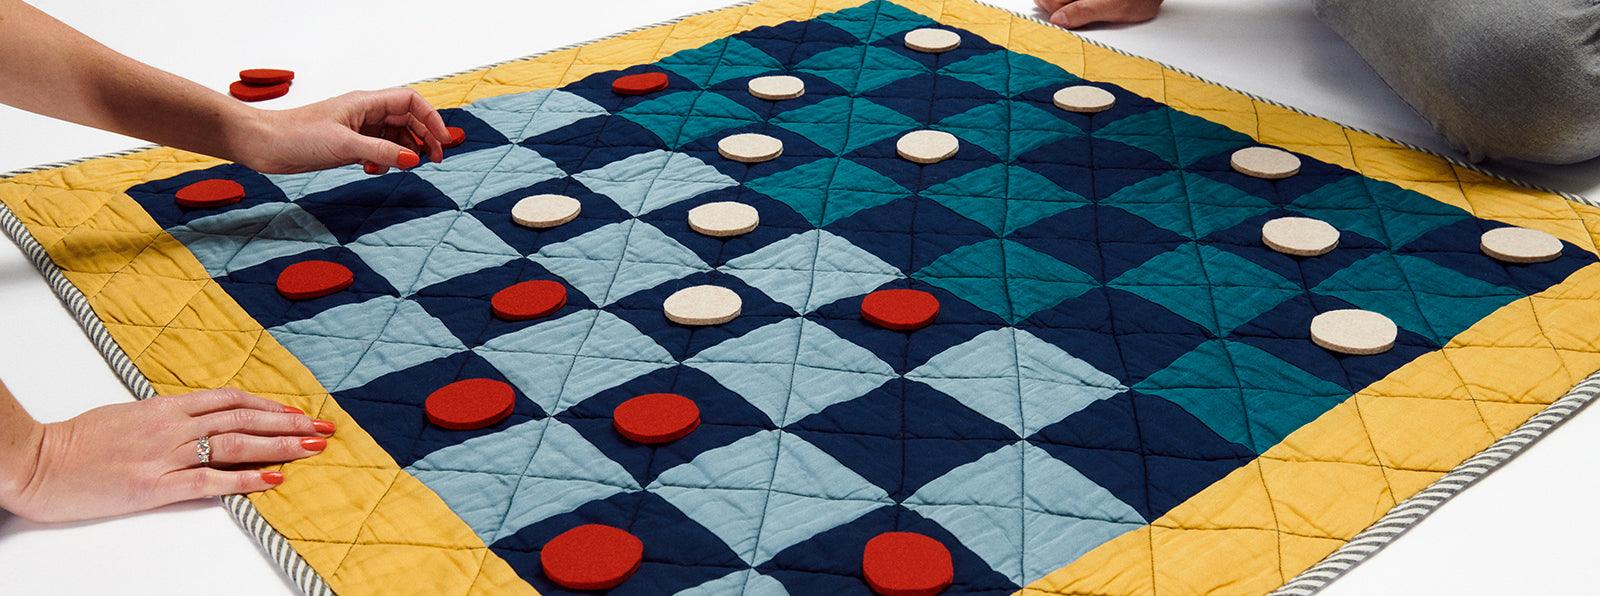 Game Quilts - Haptic Lab